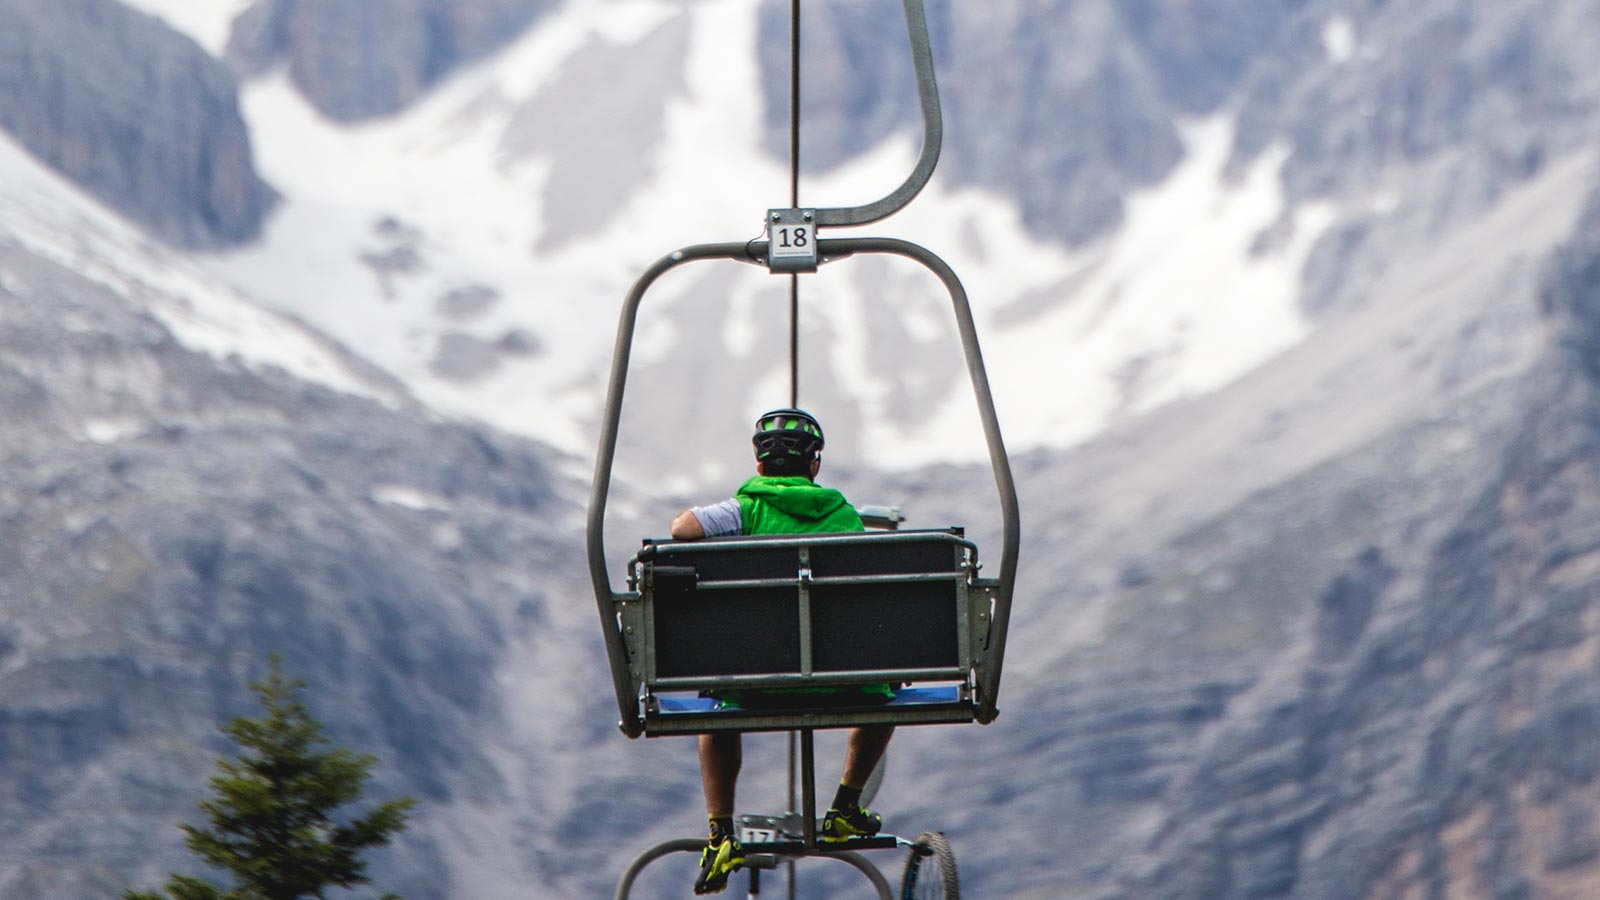 Detail of a cyclist on the chairlift around the Andalo ski resort